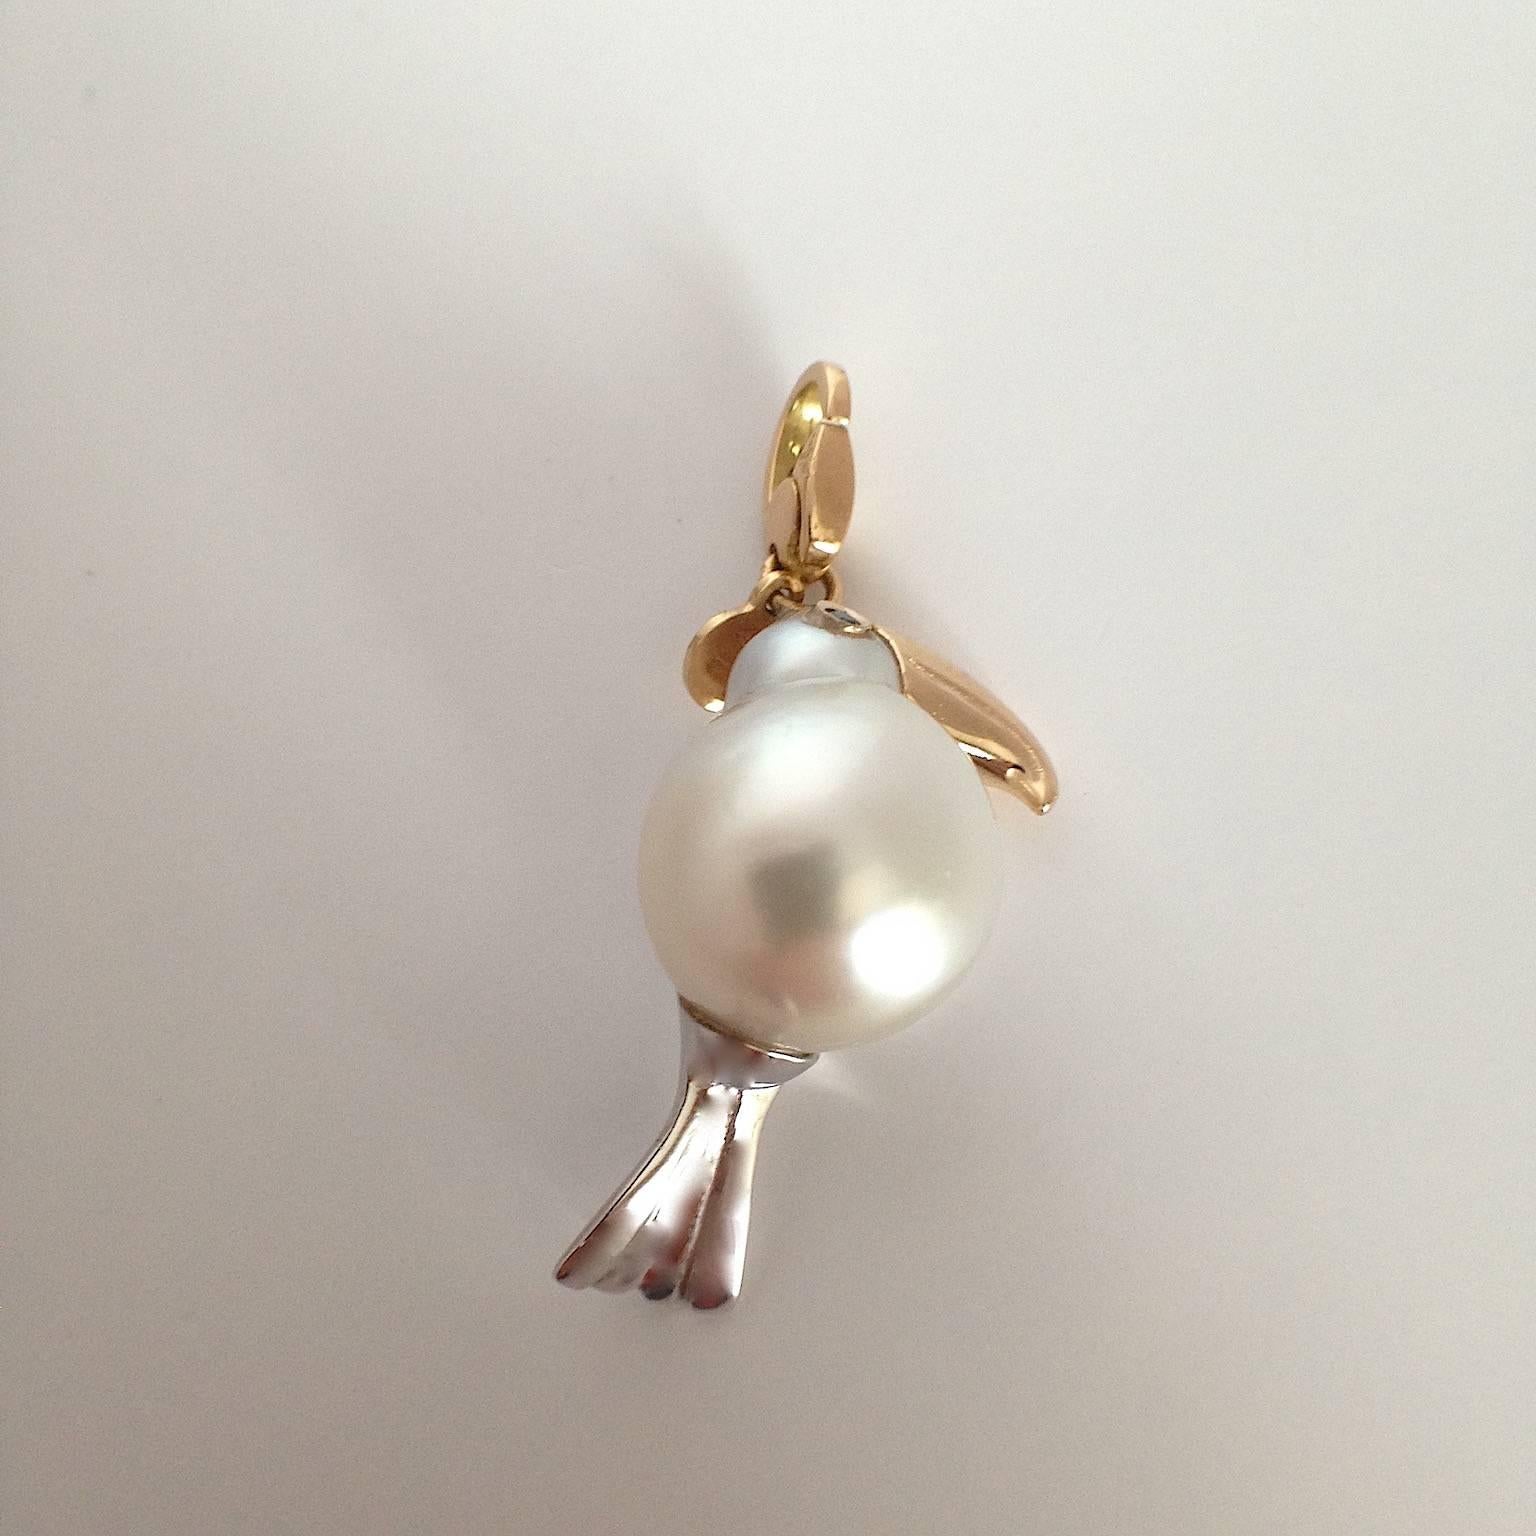 Toucan Black Diamond White and Yellow 18Kt Gold Pearl Charm or Pendant Necklace 4